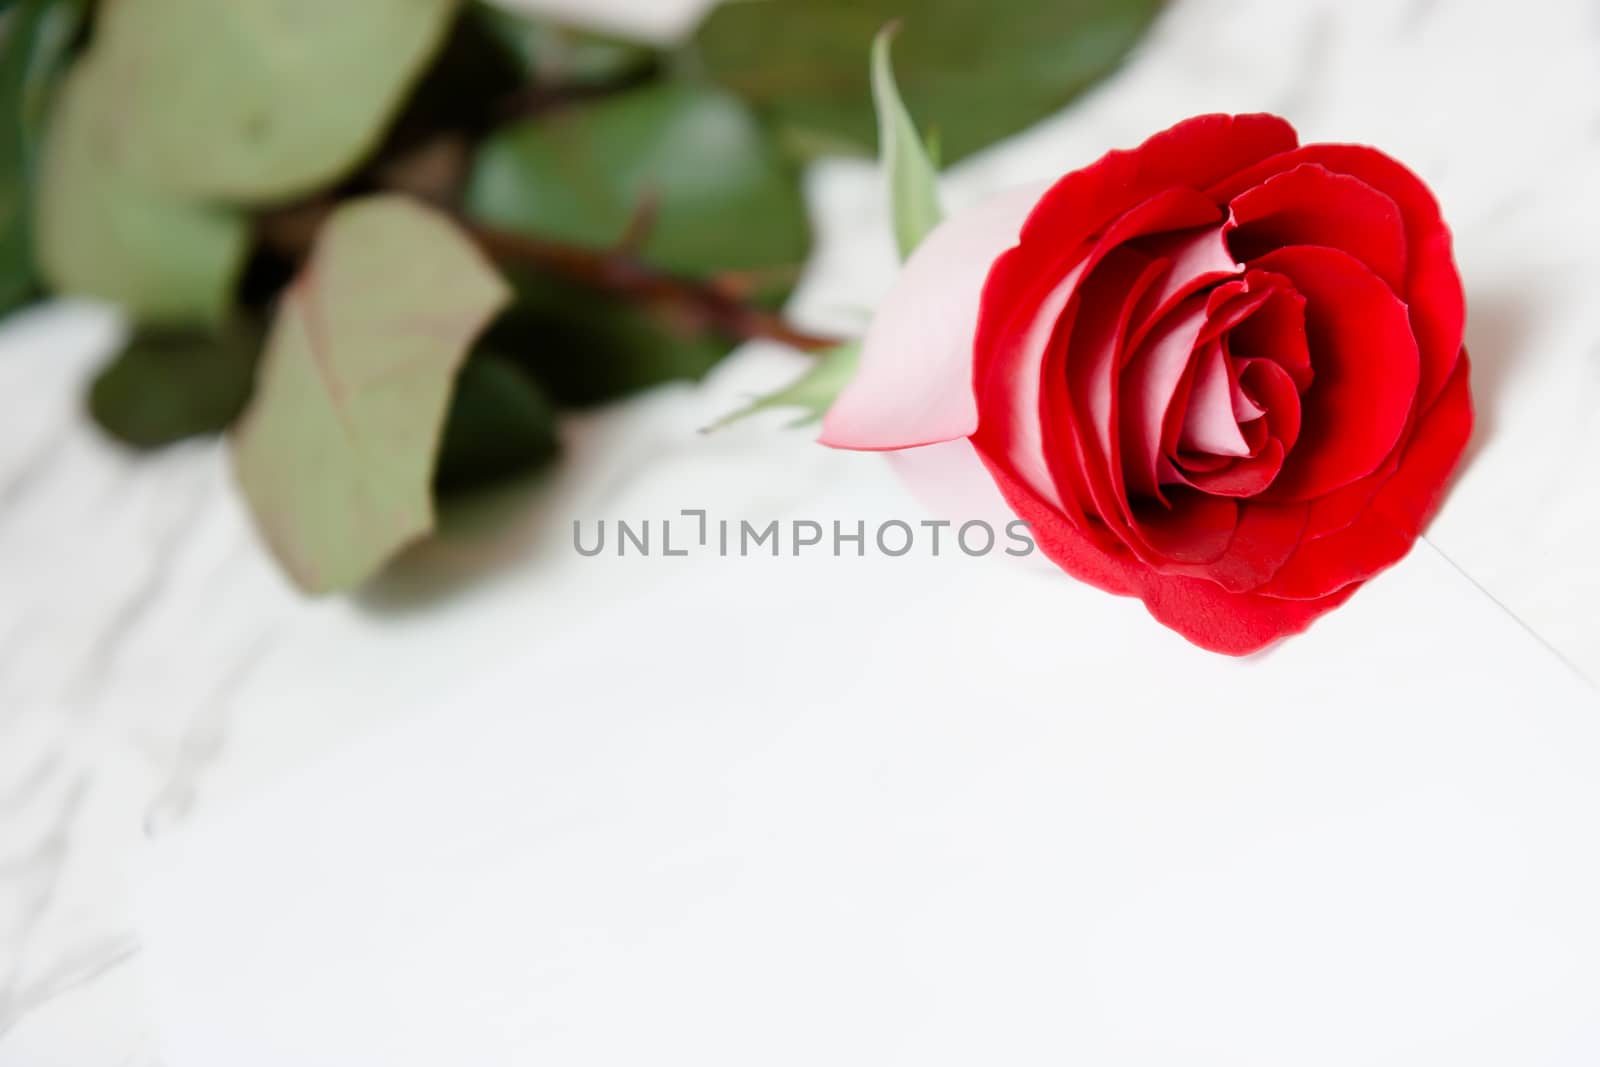 Red rose and a sheet of paper by pzRomashka